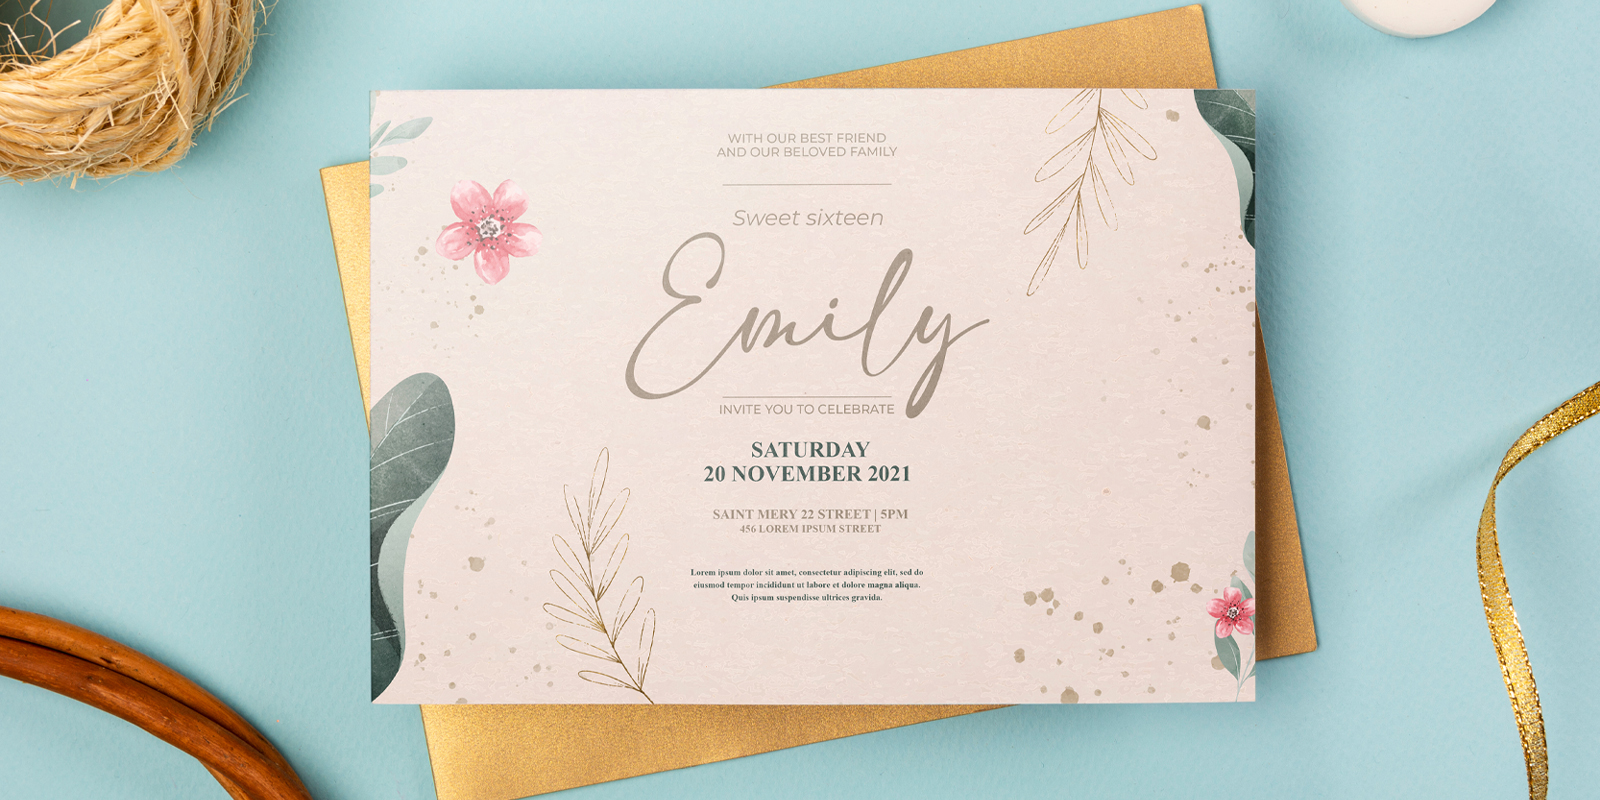 Invitations in Paris - Print with Pagerr